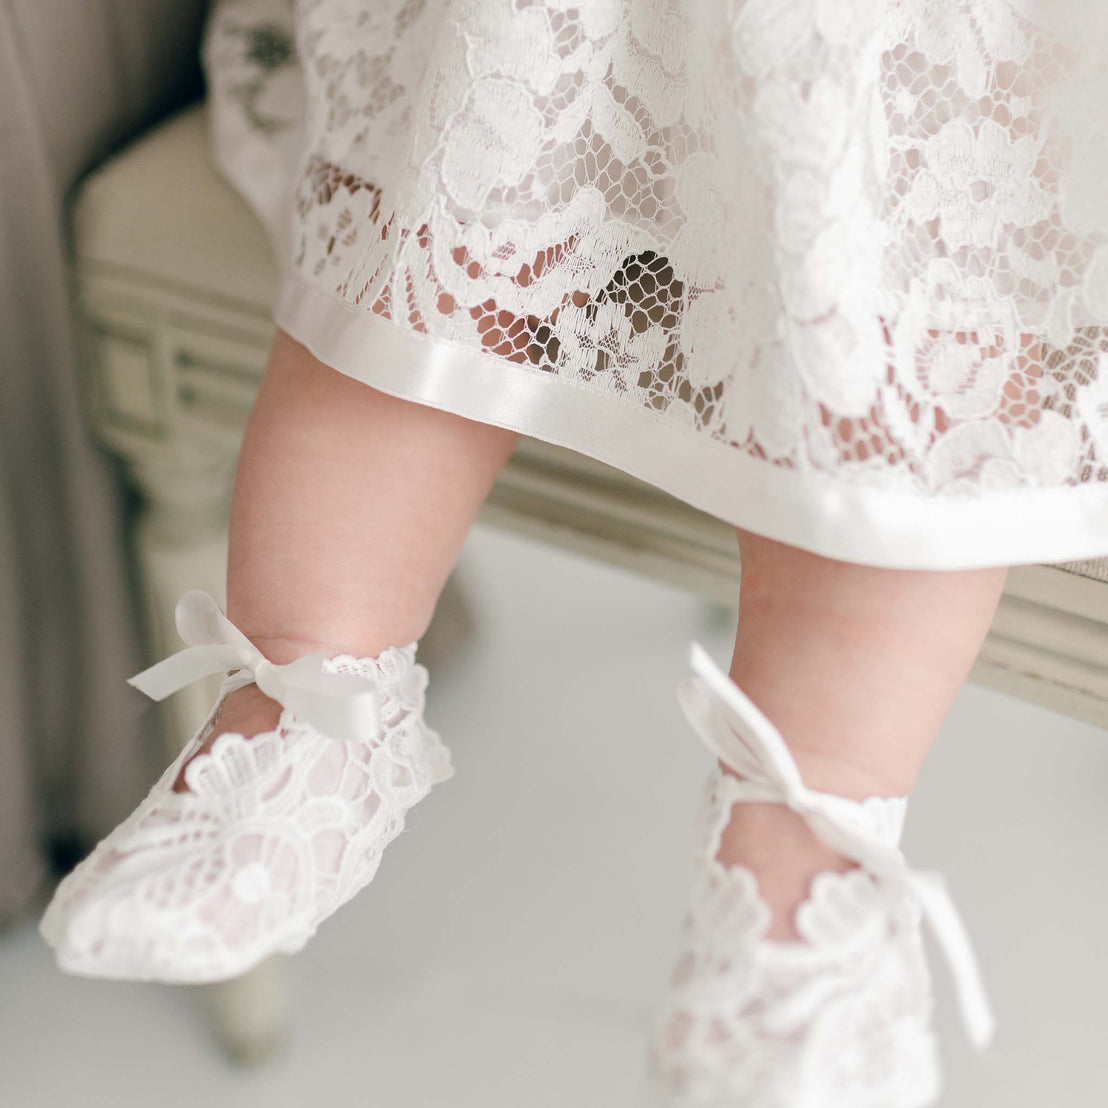 Close-up of a baby's legs wearing white Rose booties with silk bow ties, showcasing the detailed pattern of the lace on a soft-focus background.